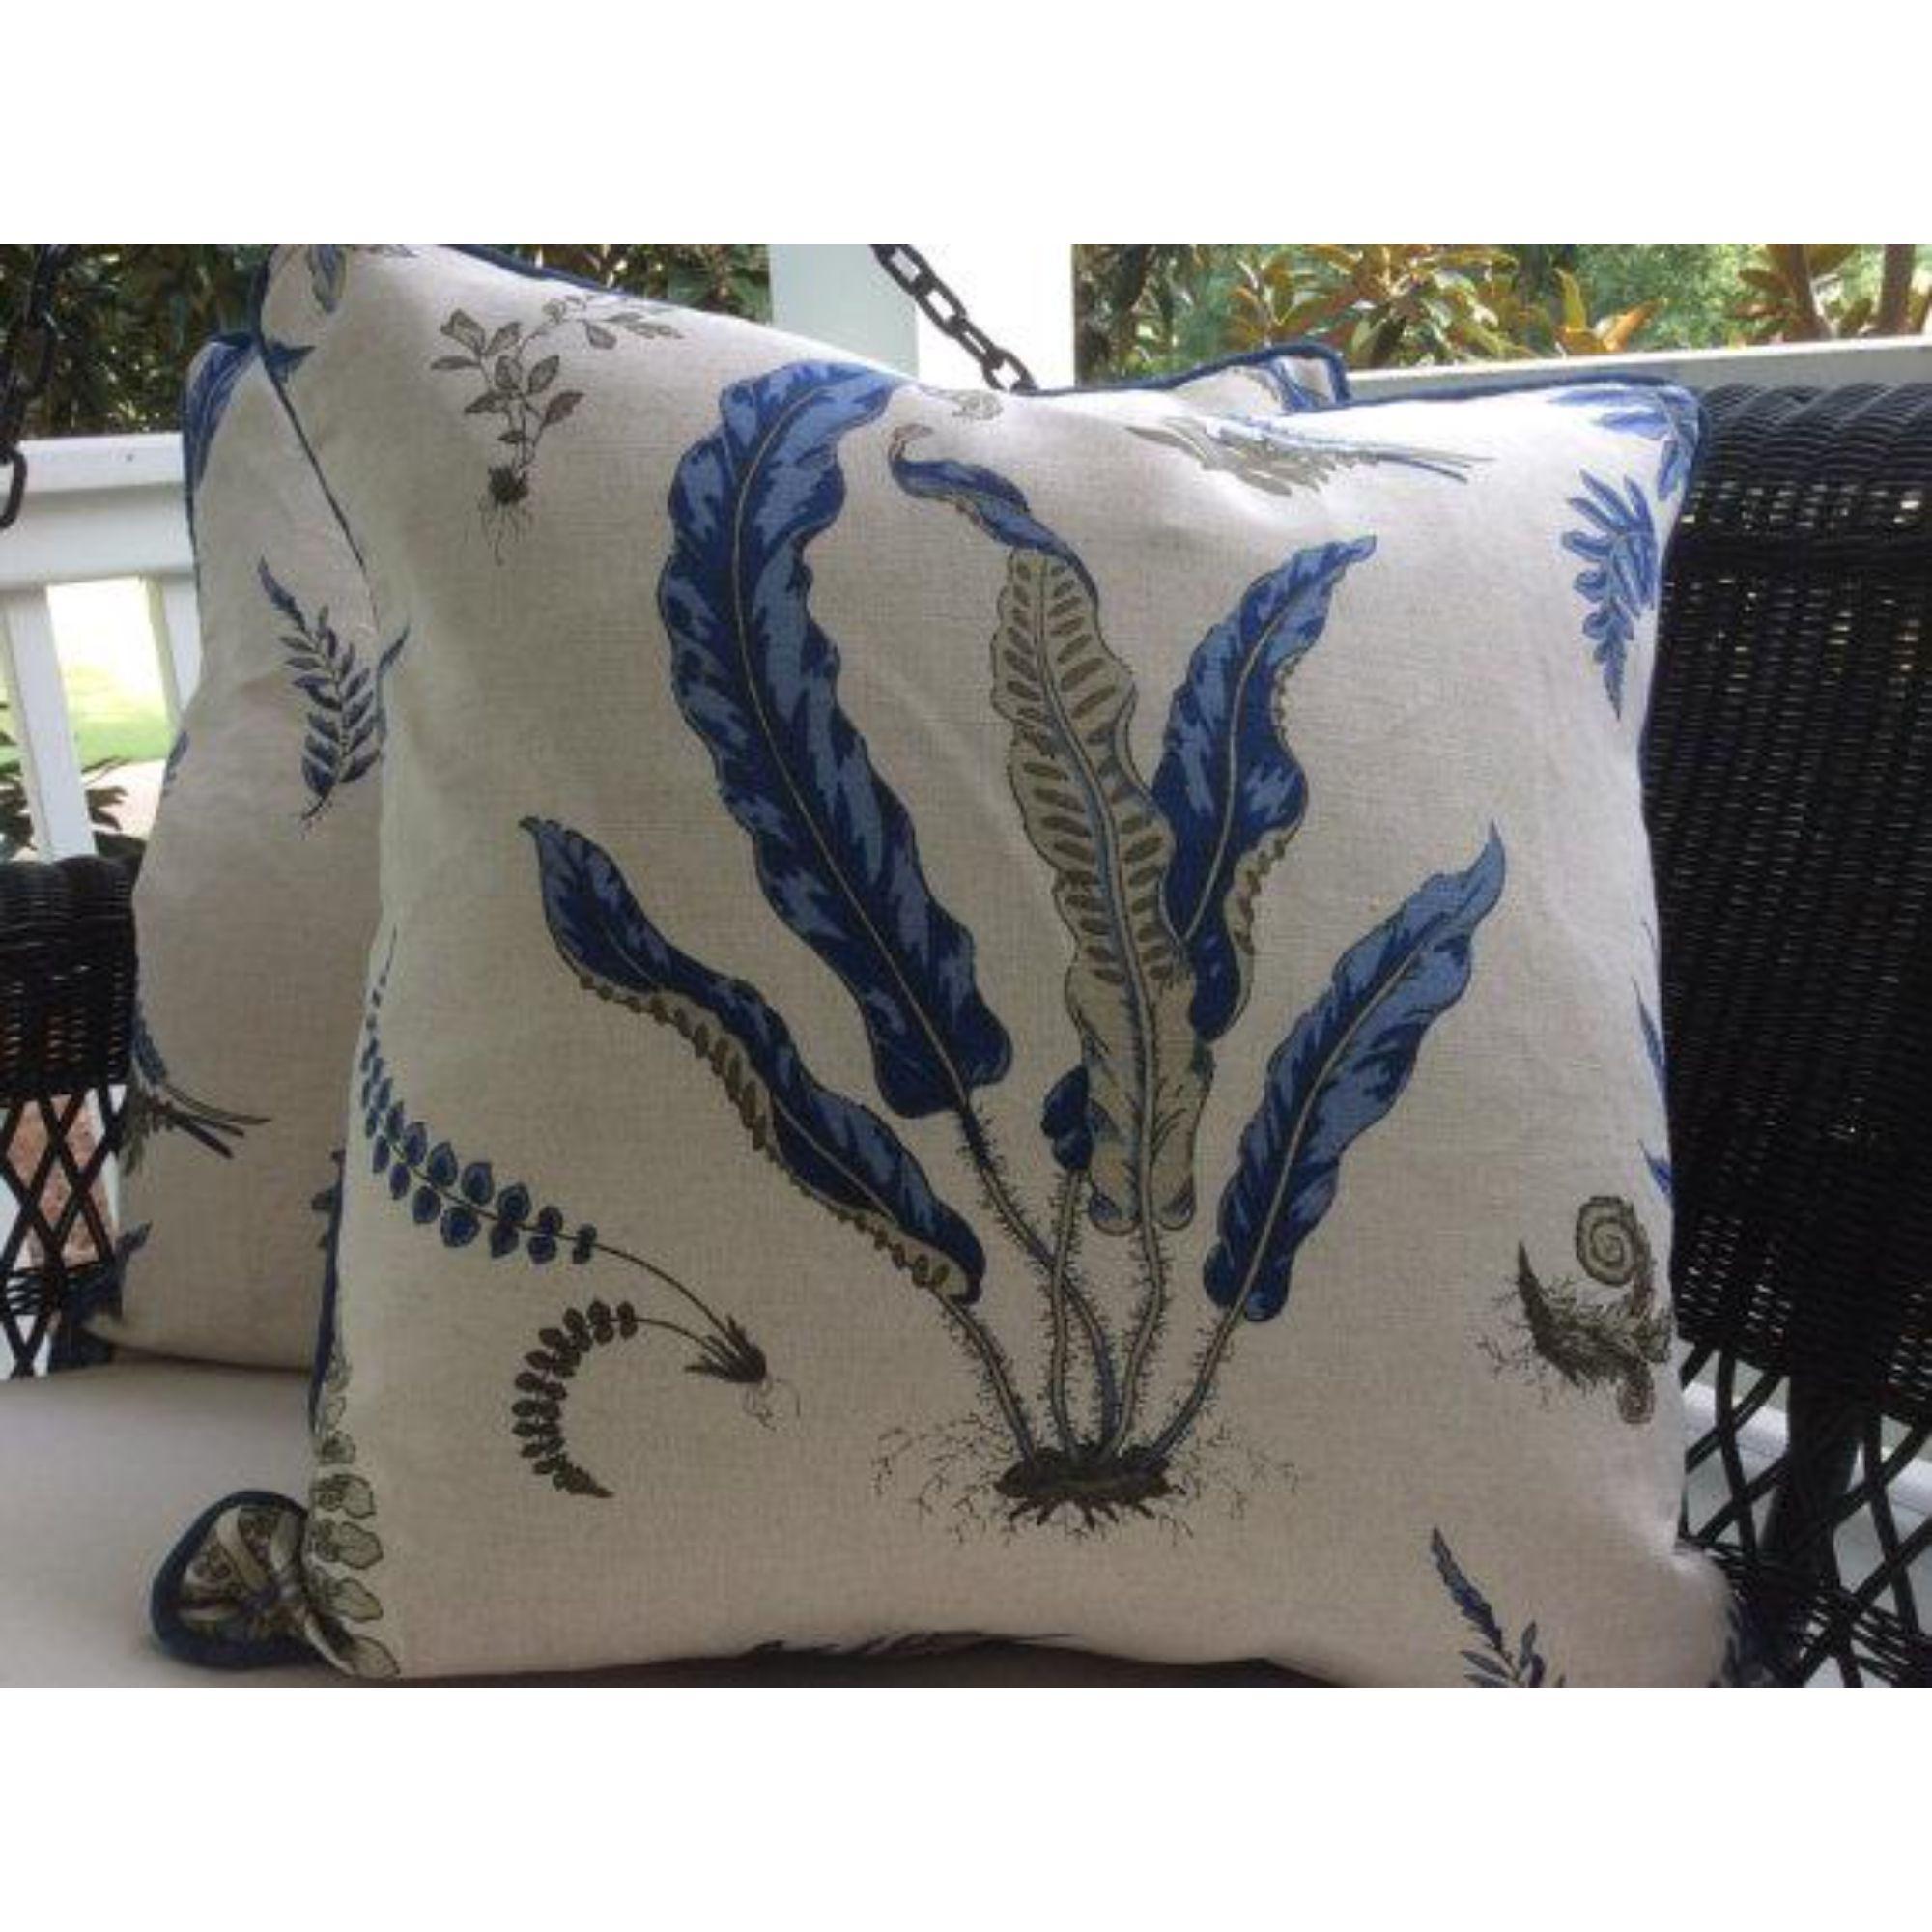 Absolutely dreamy heavy weight linen from GP and J Baker features botanical ferns in a soft denim blue and khaki on an...Contemporary GP & J Baker Pillows in Indigo Blue & Linen 